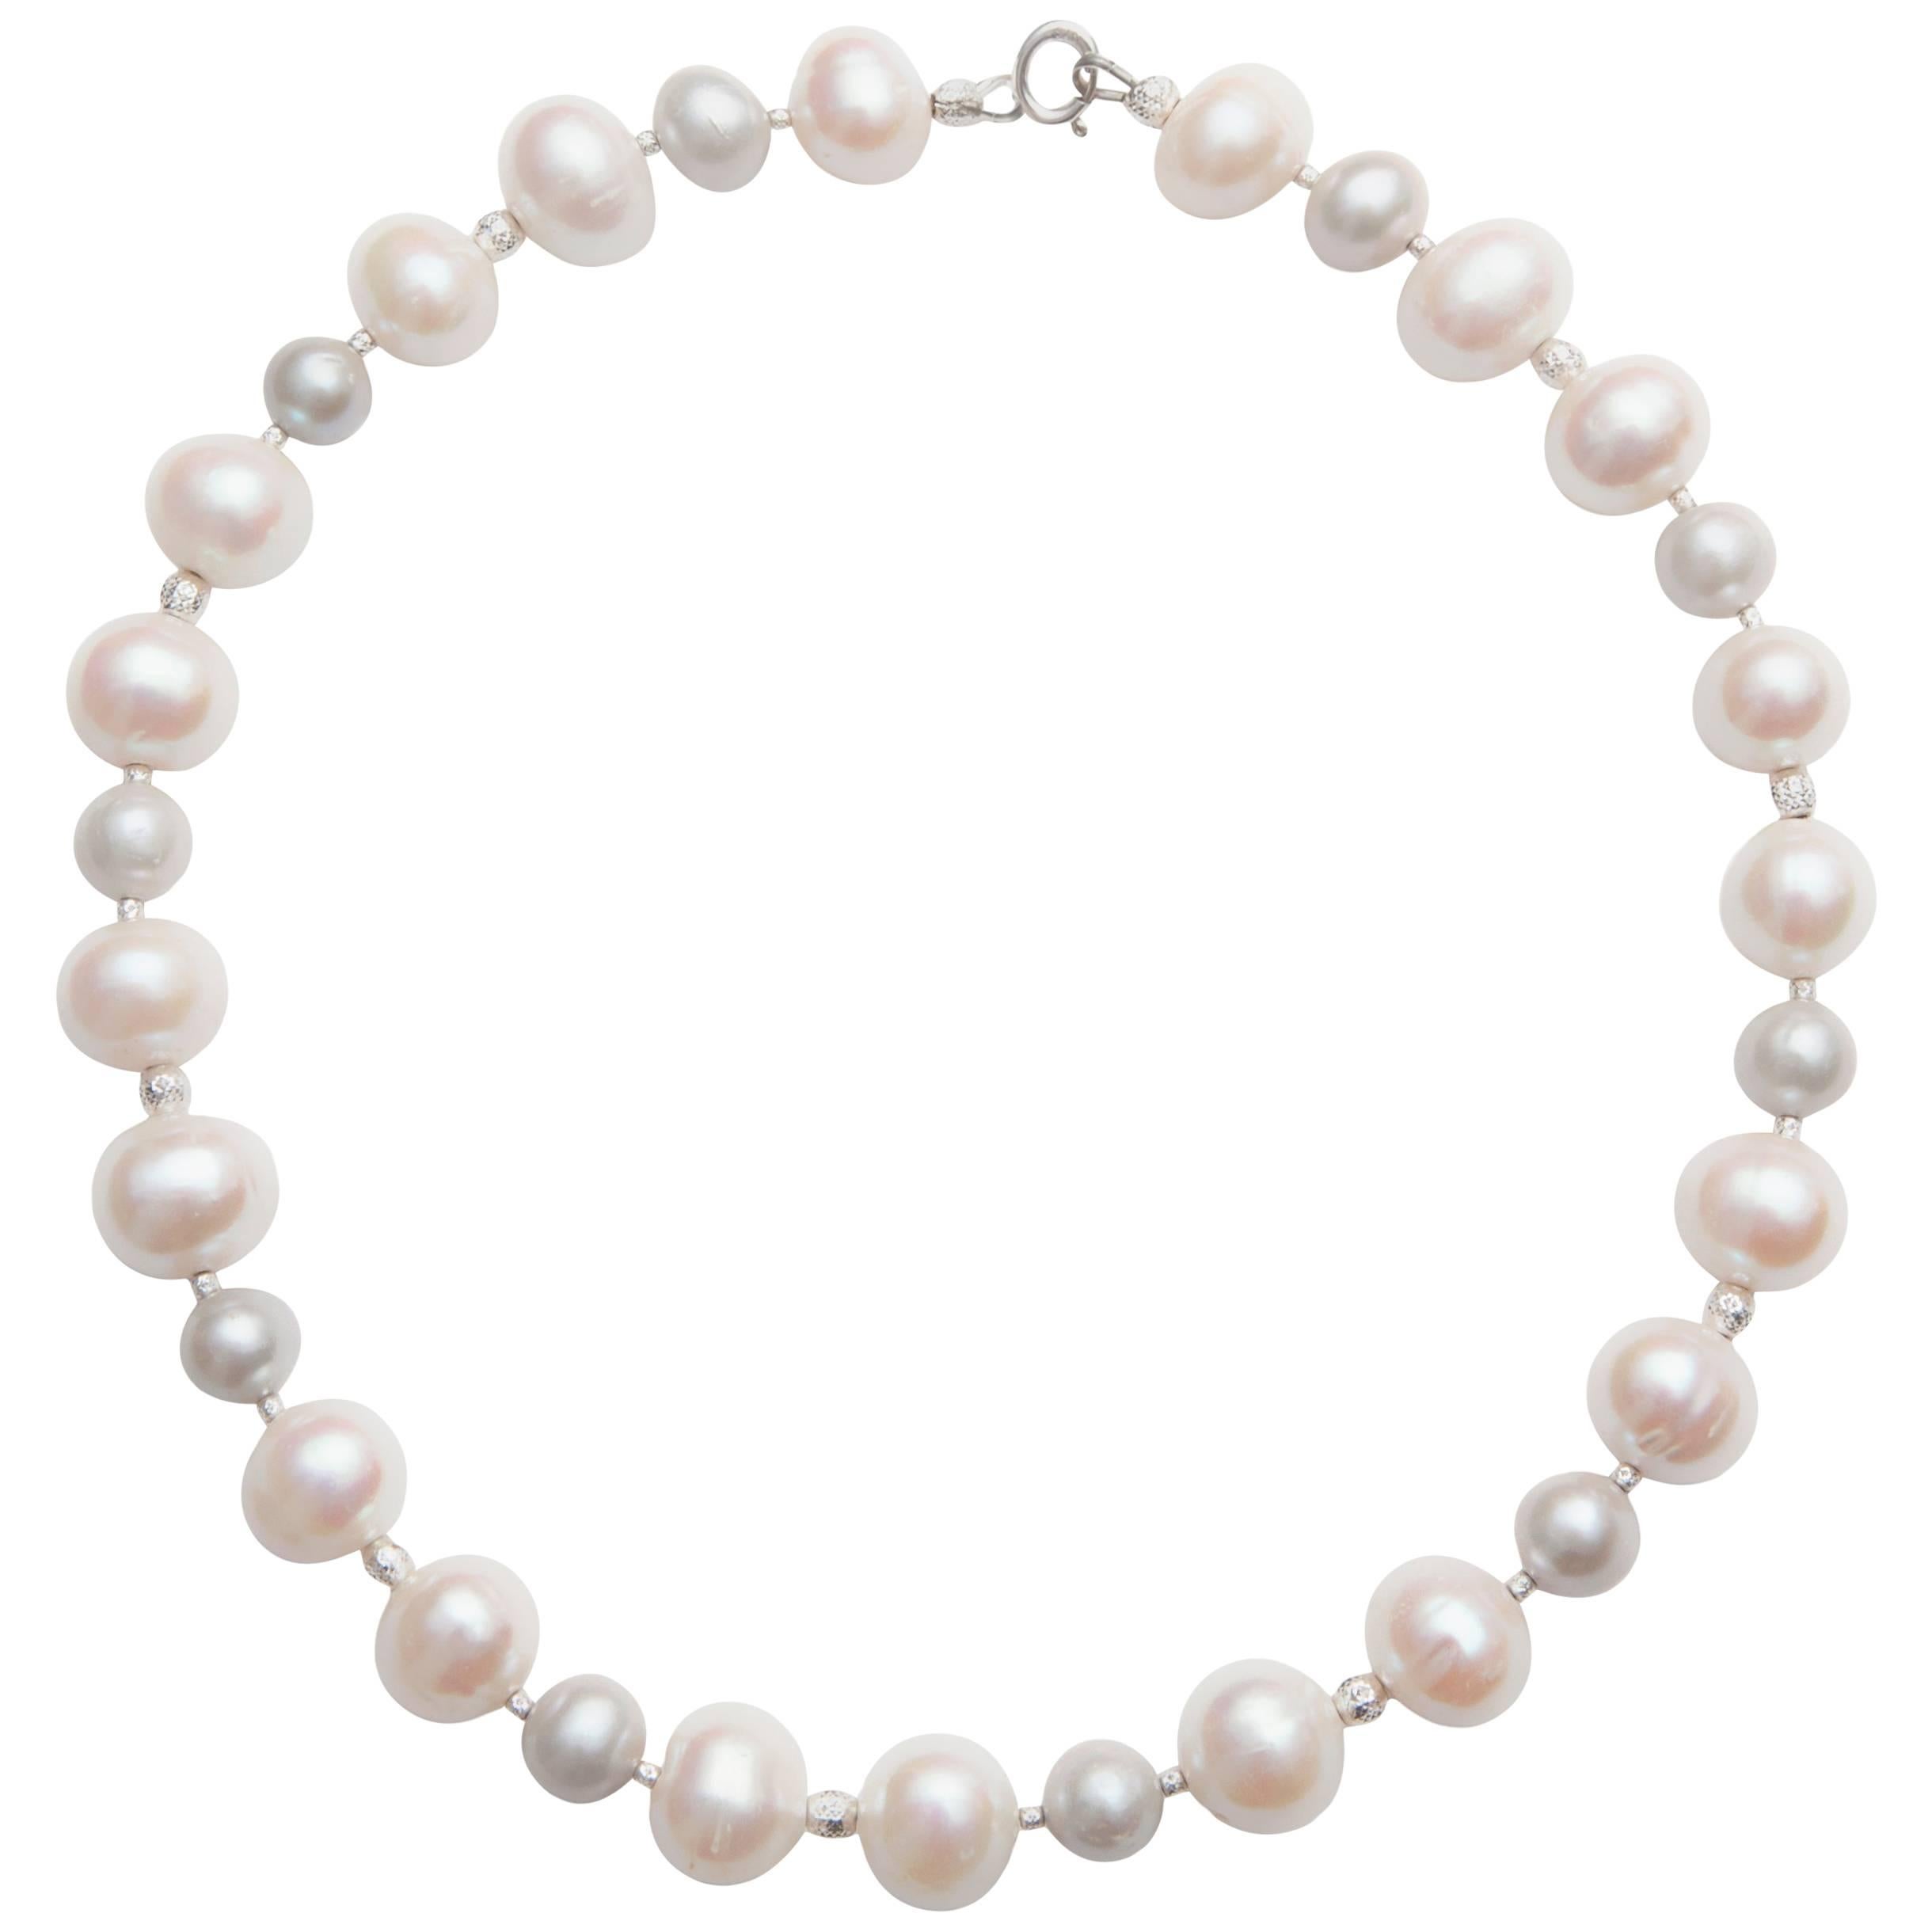  Grey and White Classic Pearl Necklace with Diamond Cut Beads For Sale